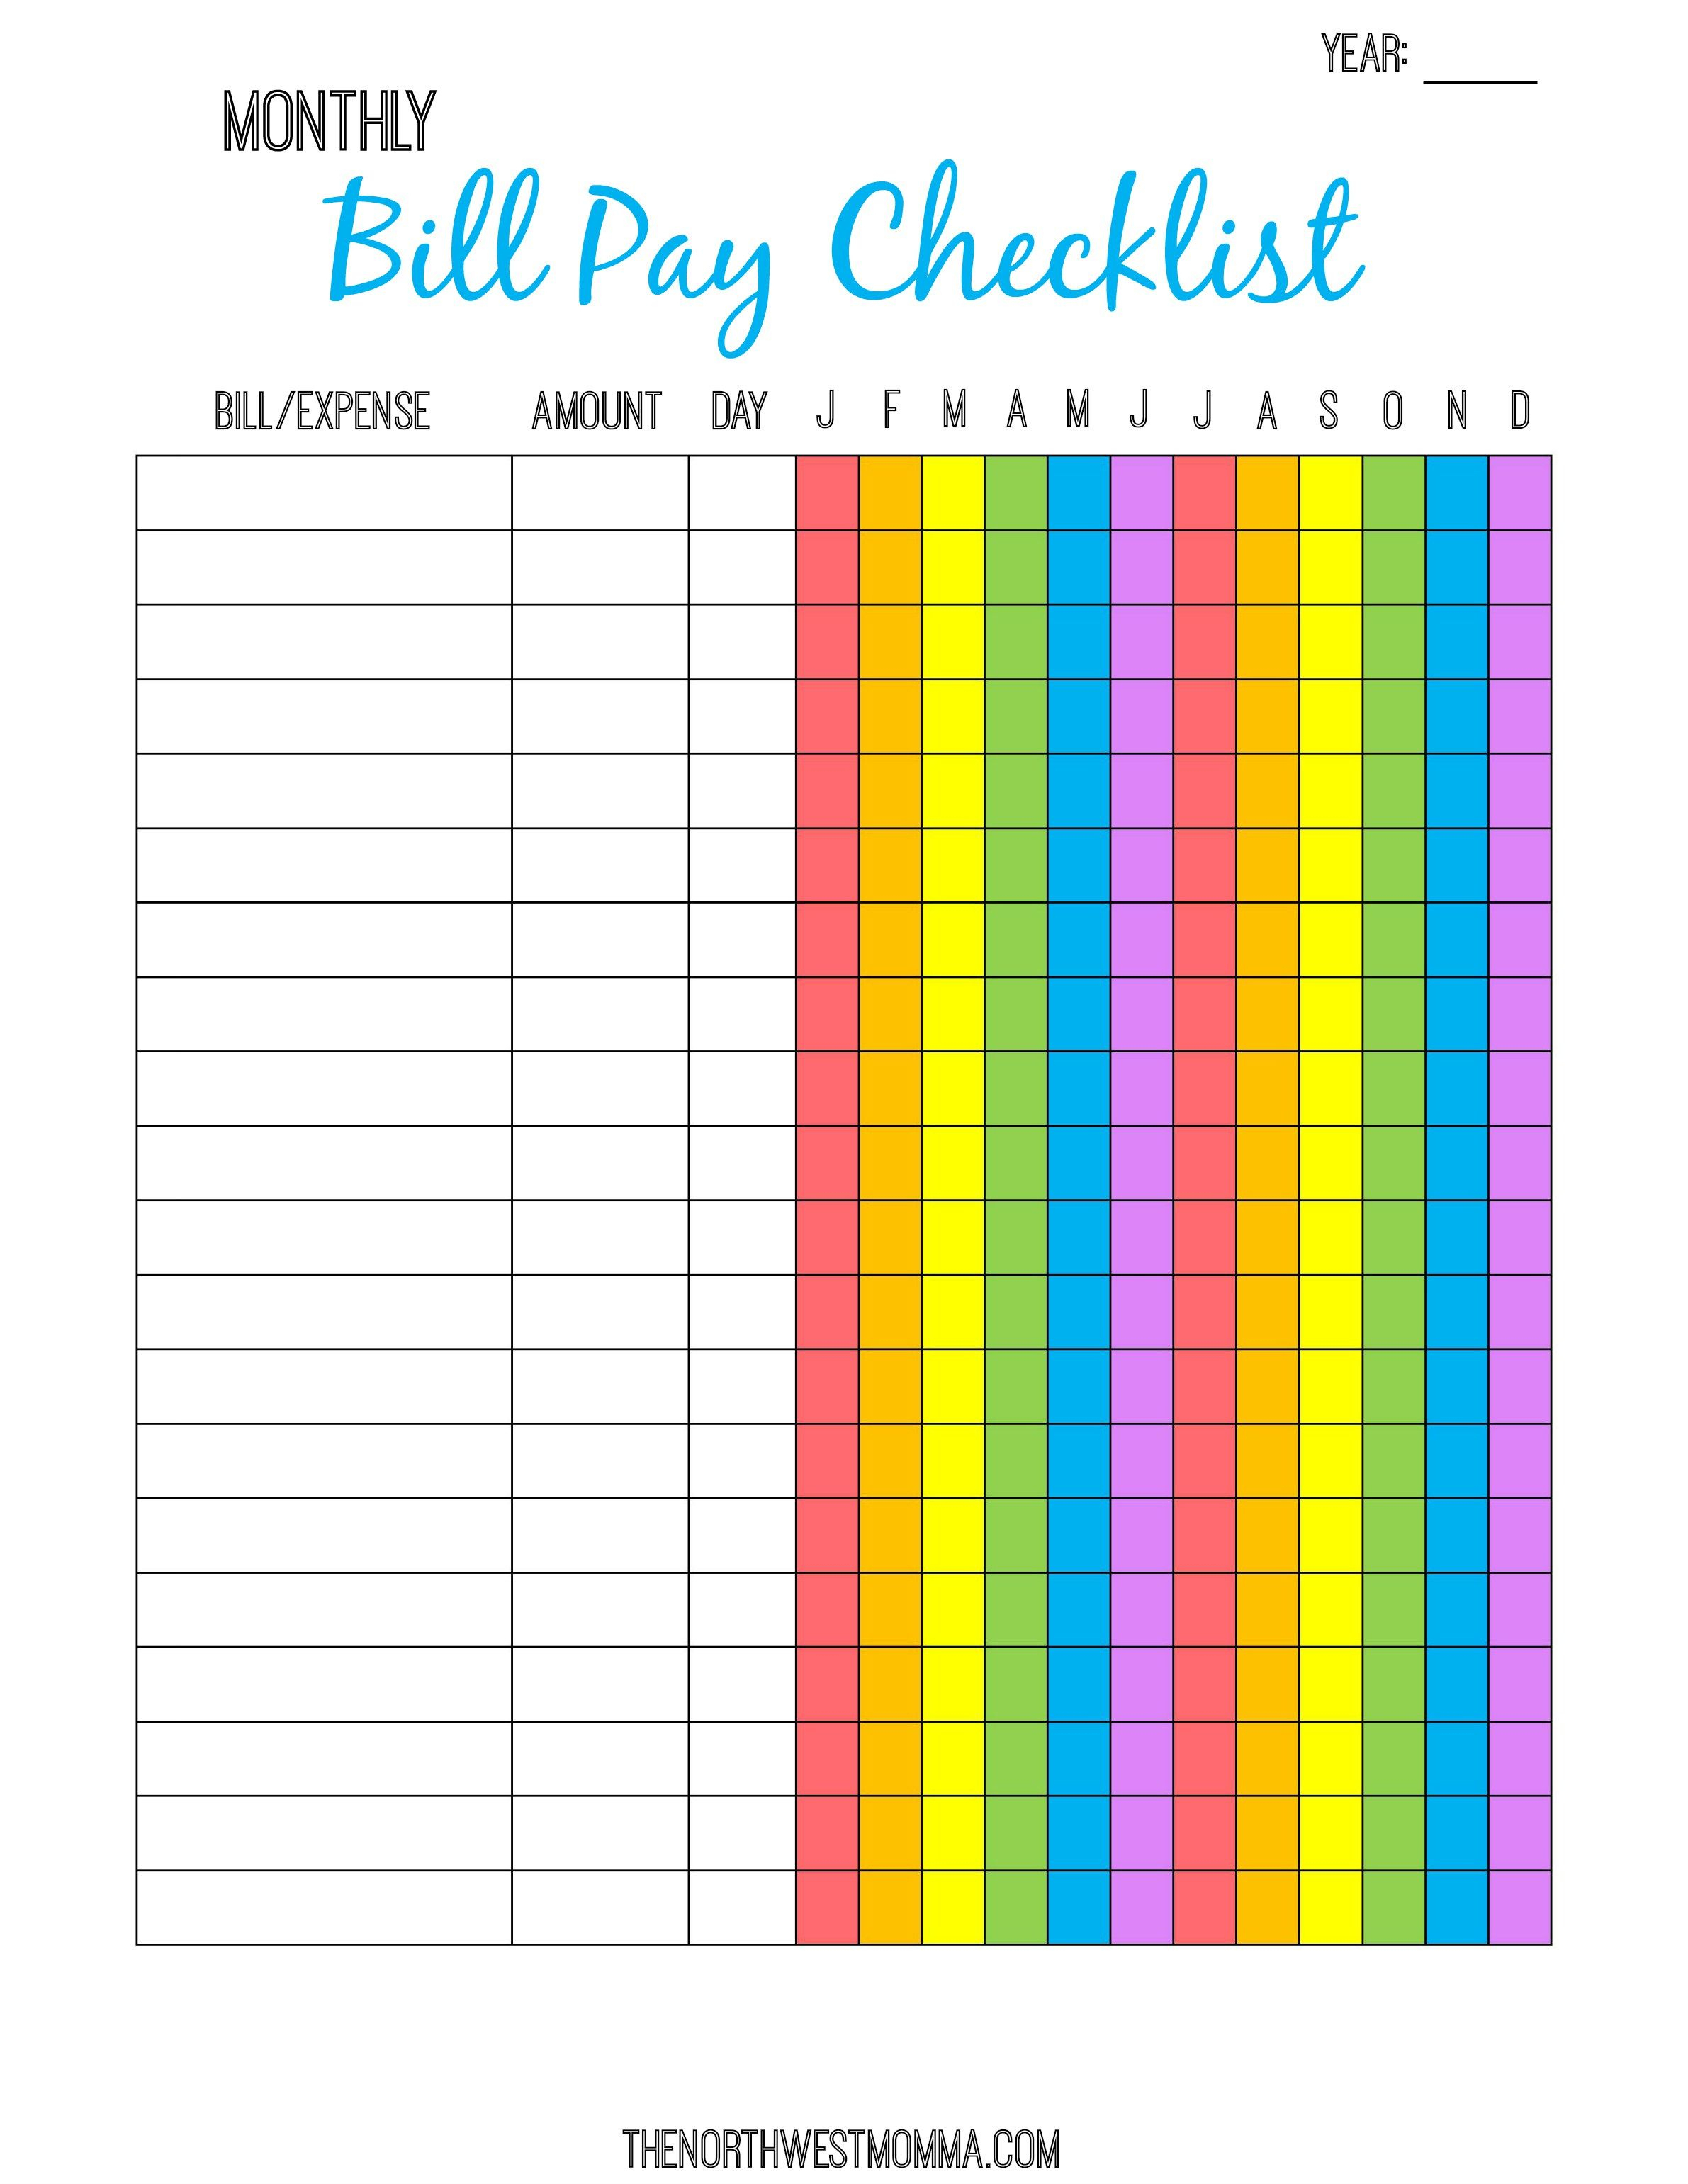 Monthly Bill Pay Checklist- Free Printable! | Bill Payment